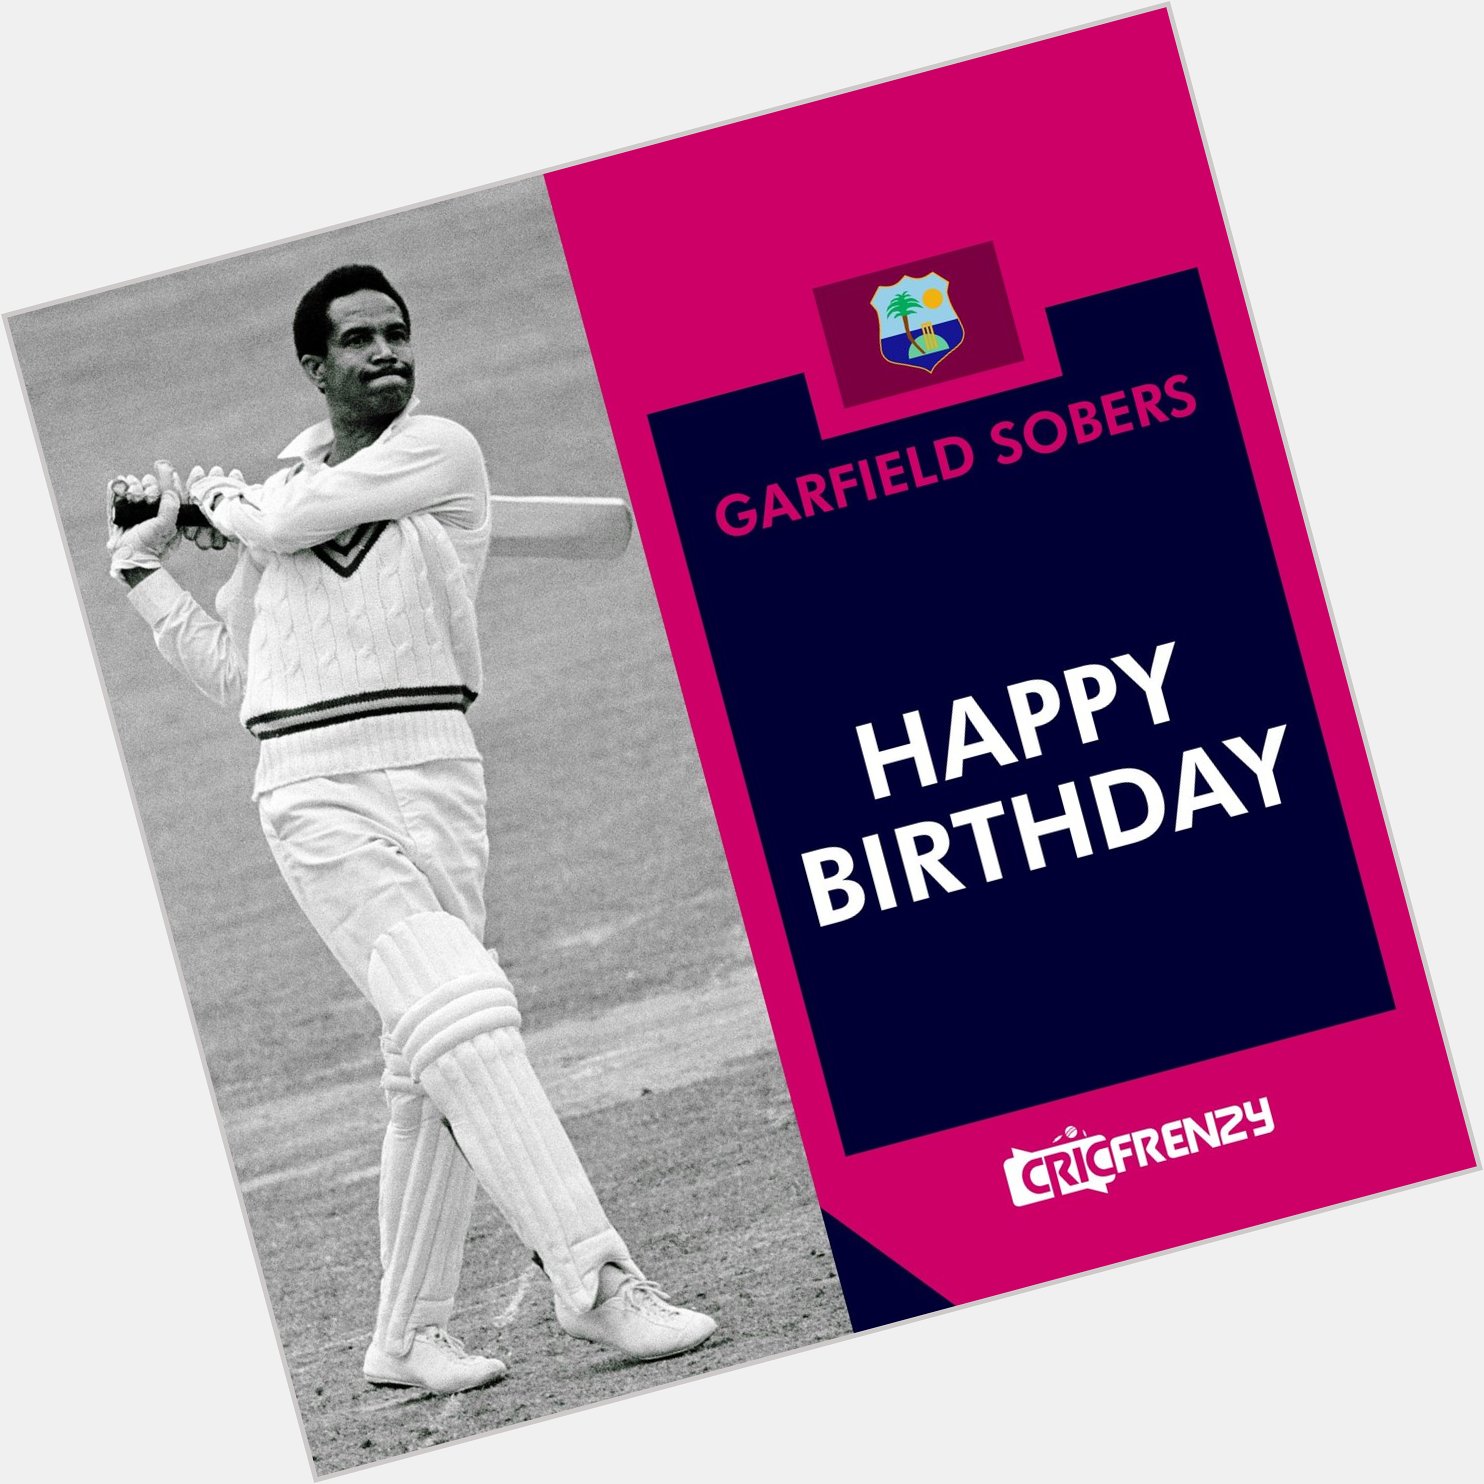  One of the greatest allrounder ever

Happy birthday Garfield Sobers  